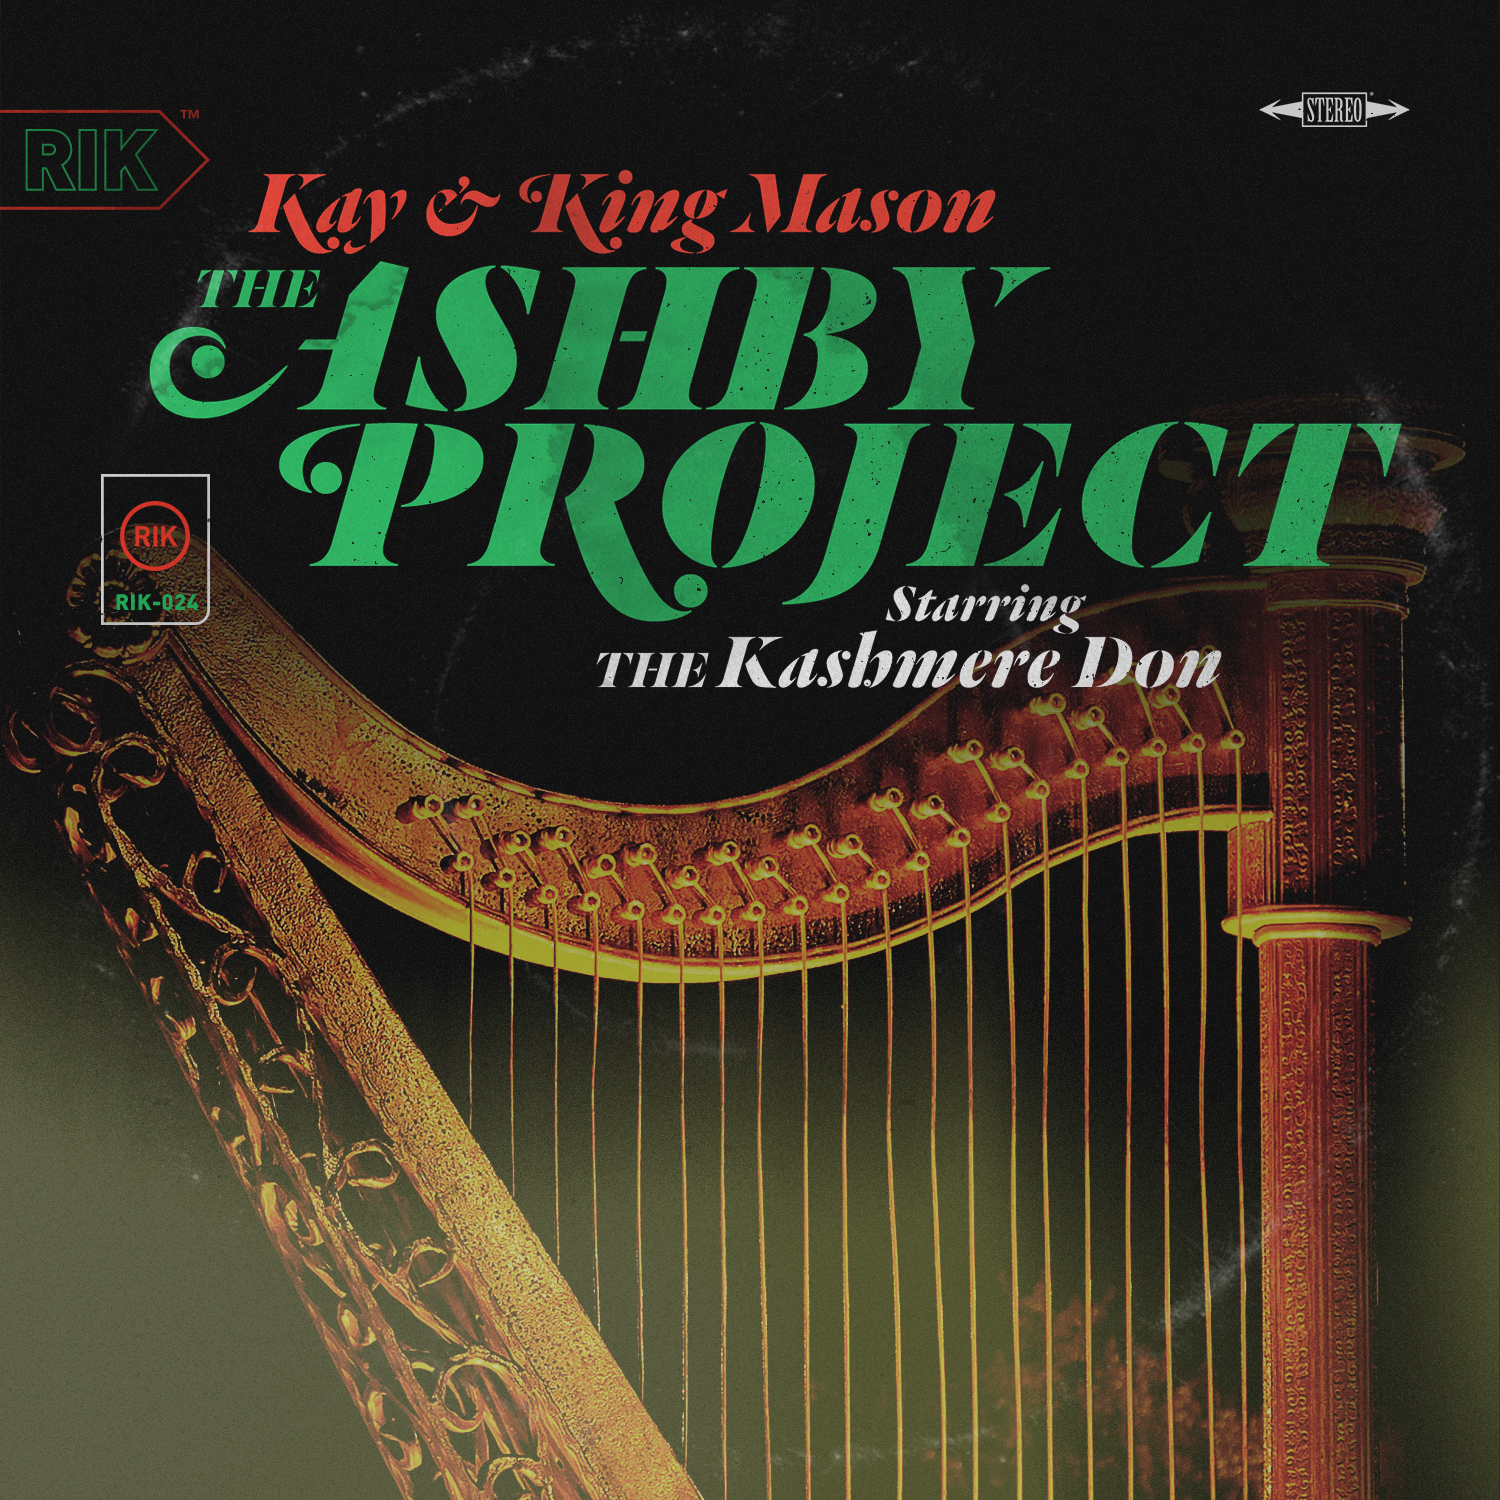 Kay & King Mason — The Ashby Project starring The Kashmere Don